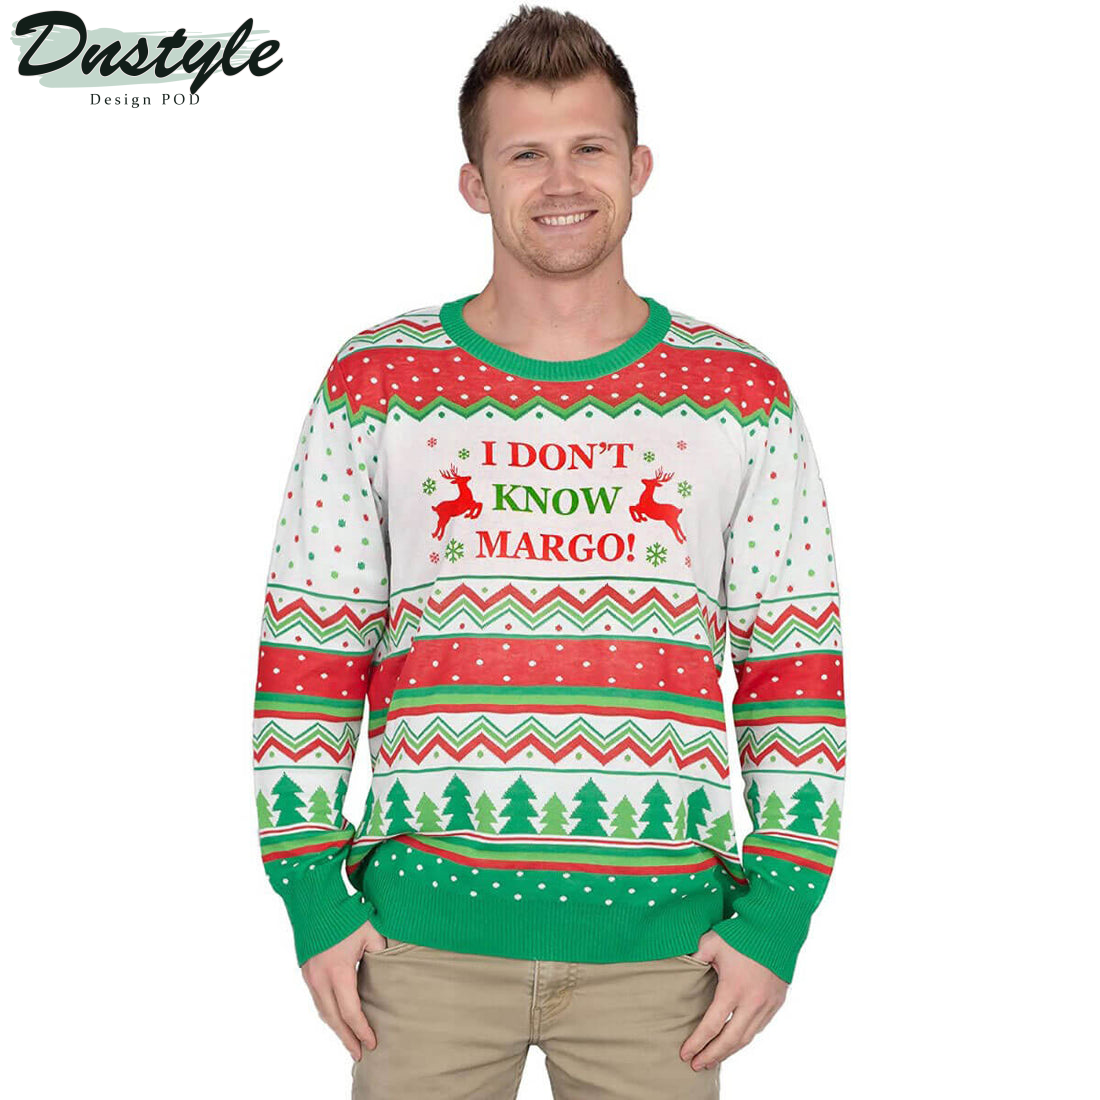 I Don't Know Margo Ugly Sweater